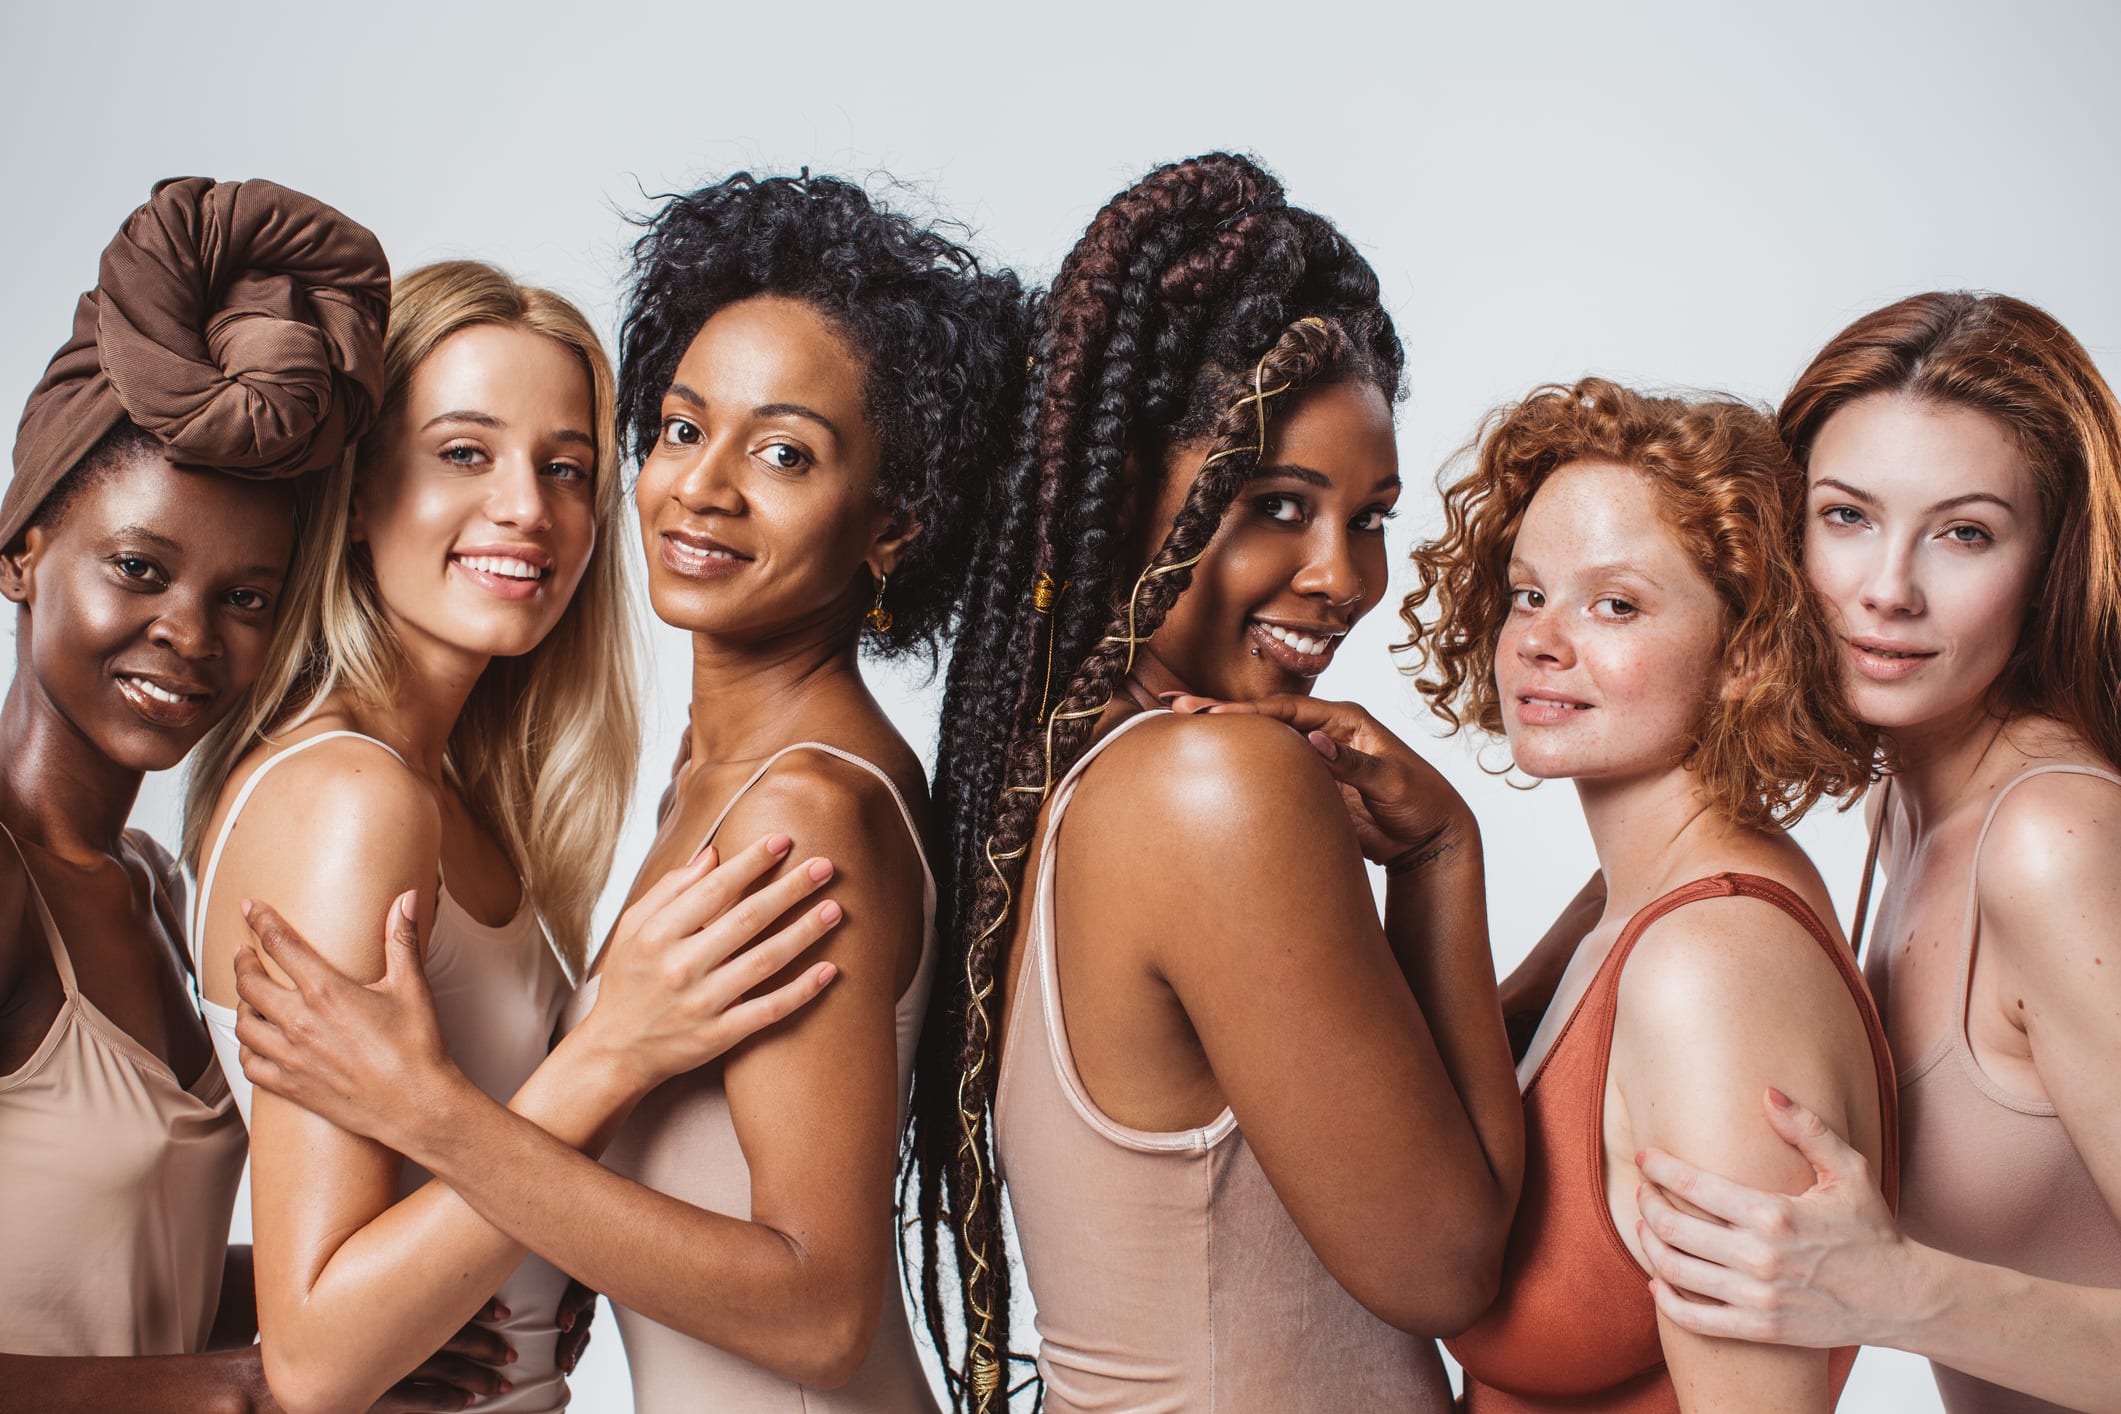 Group of women with different body type in underwear, studio shot.